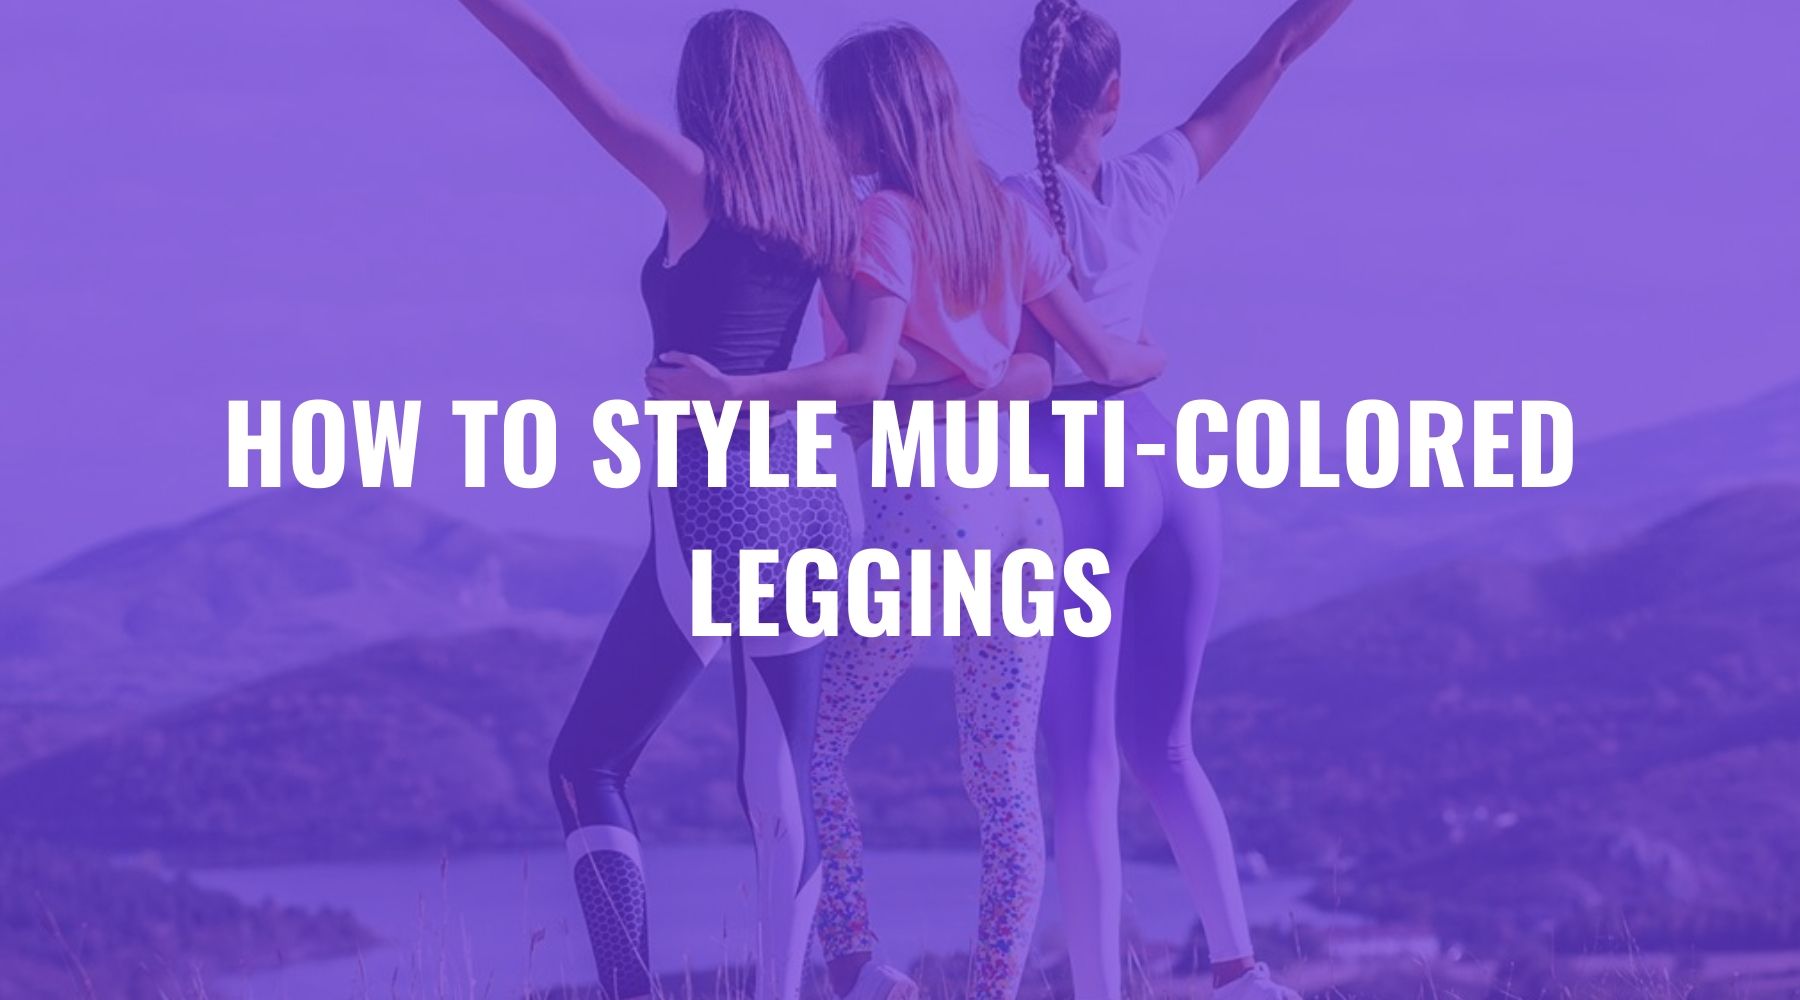 How To Wear Colored Leggings